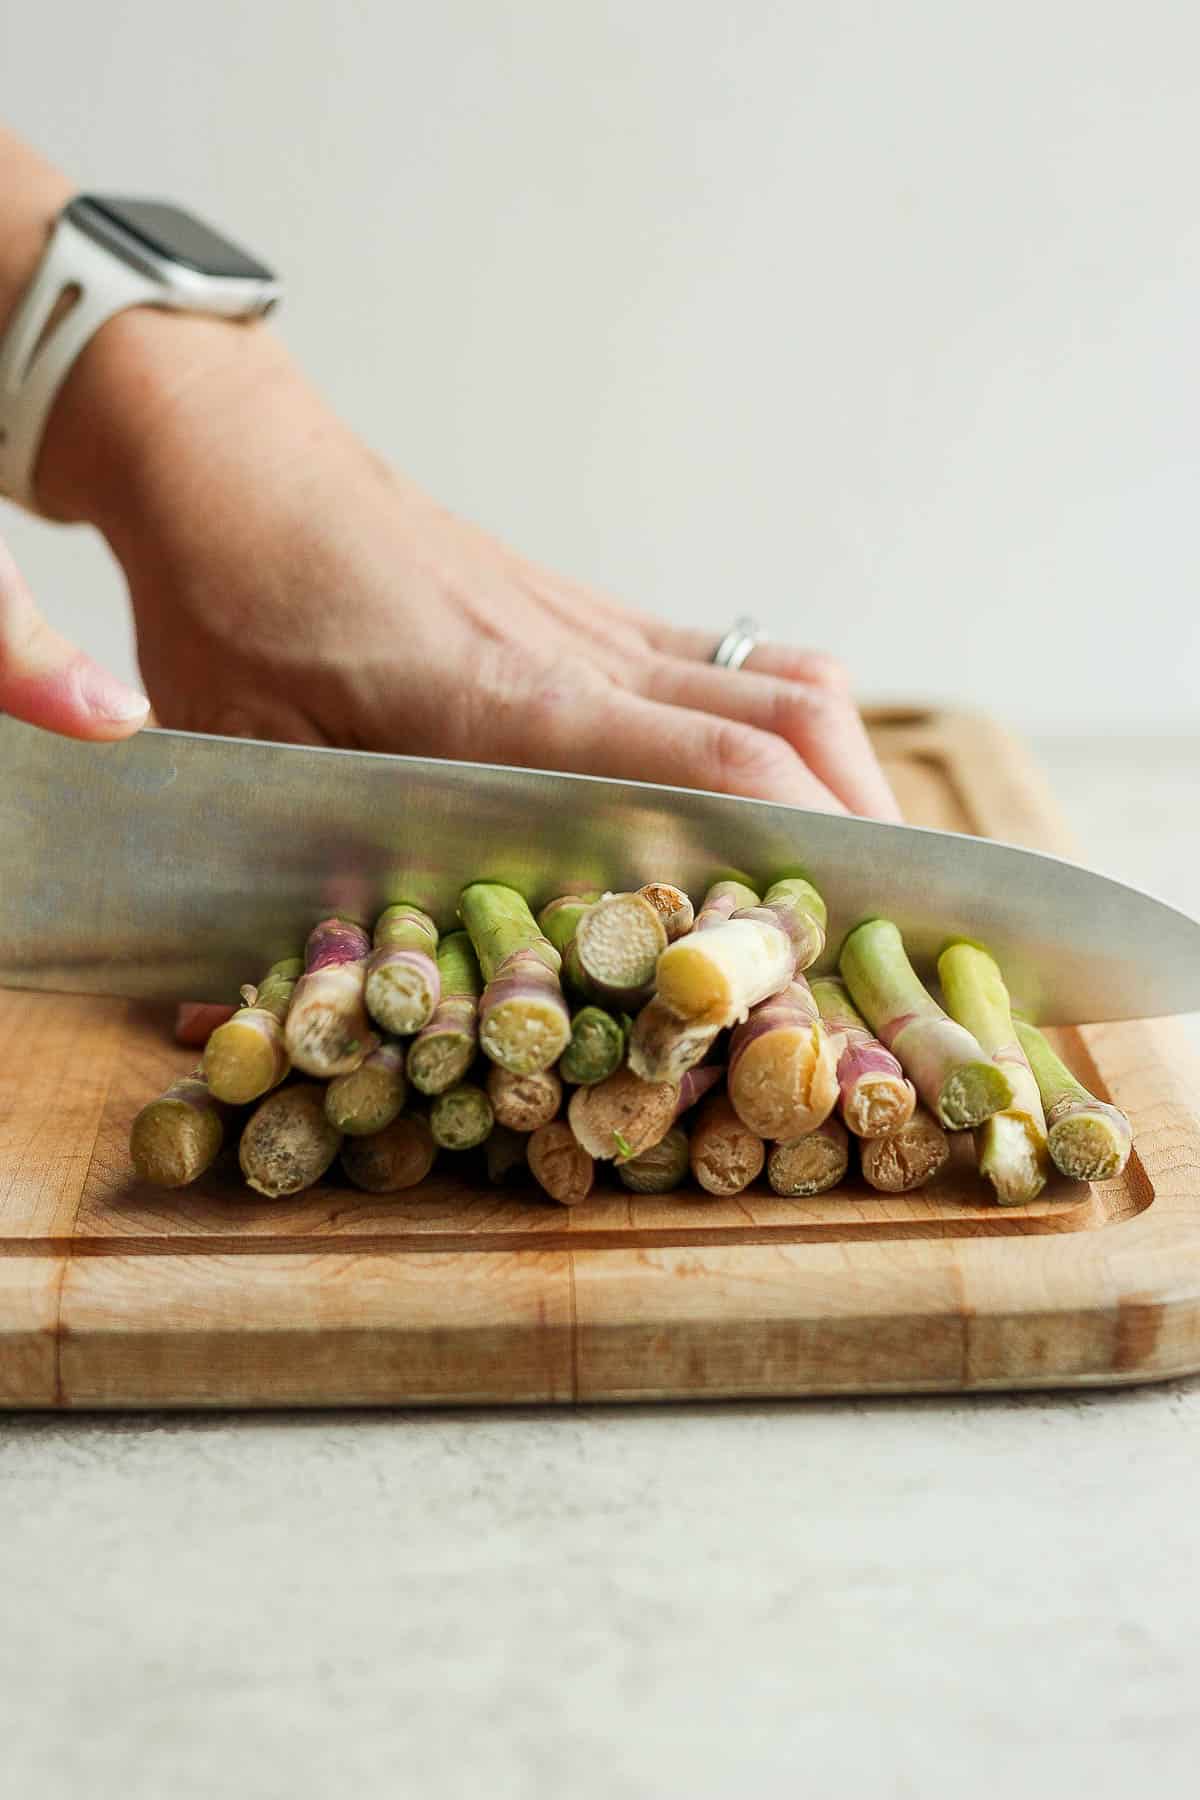 A large knife cutting the thick ends off the asparagus stalks on a cutting board.